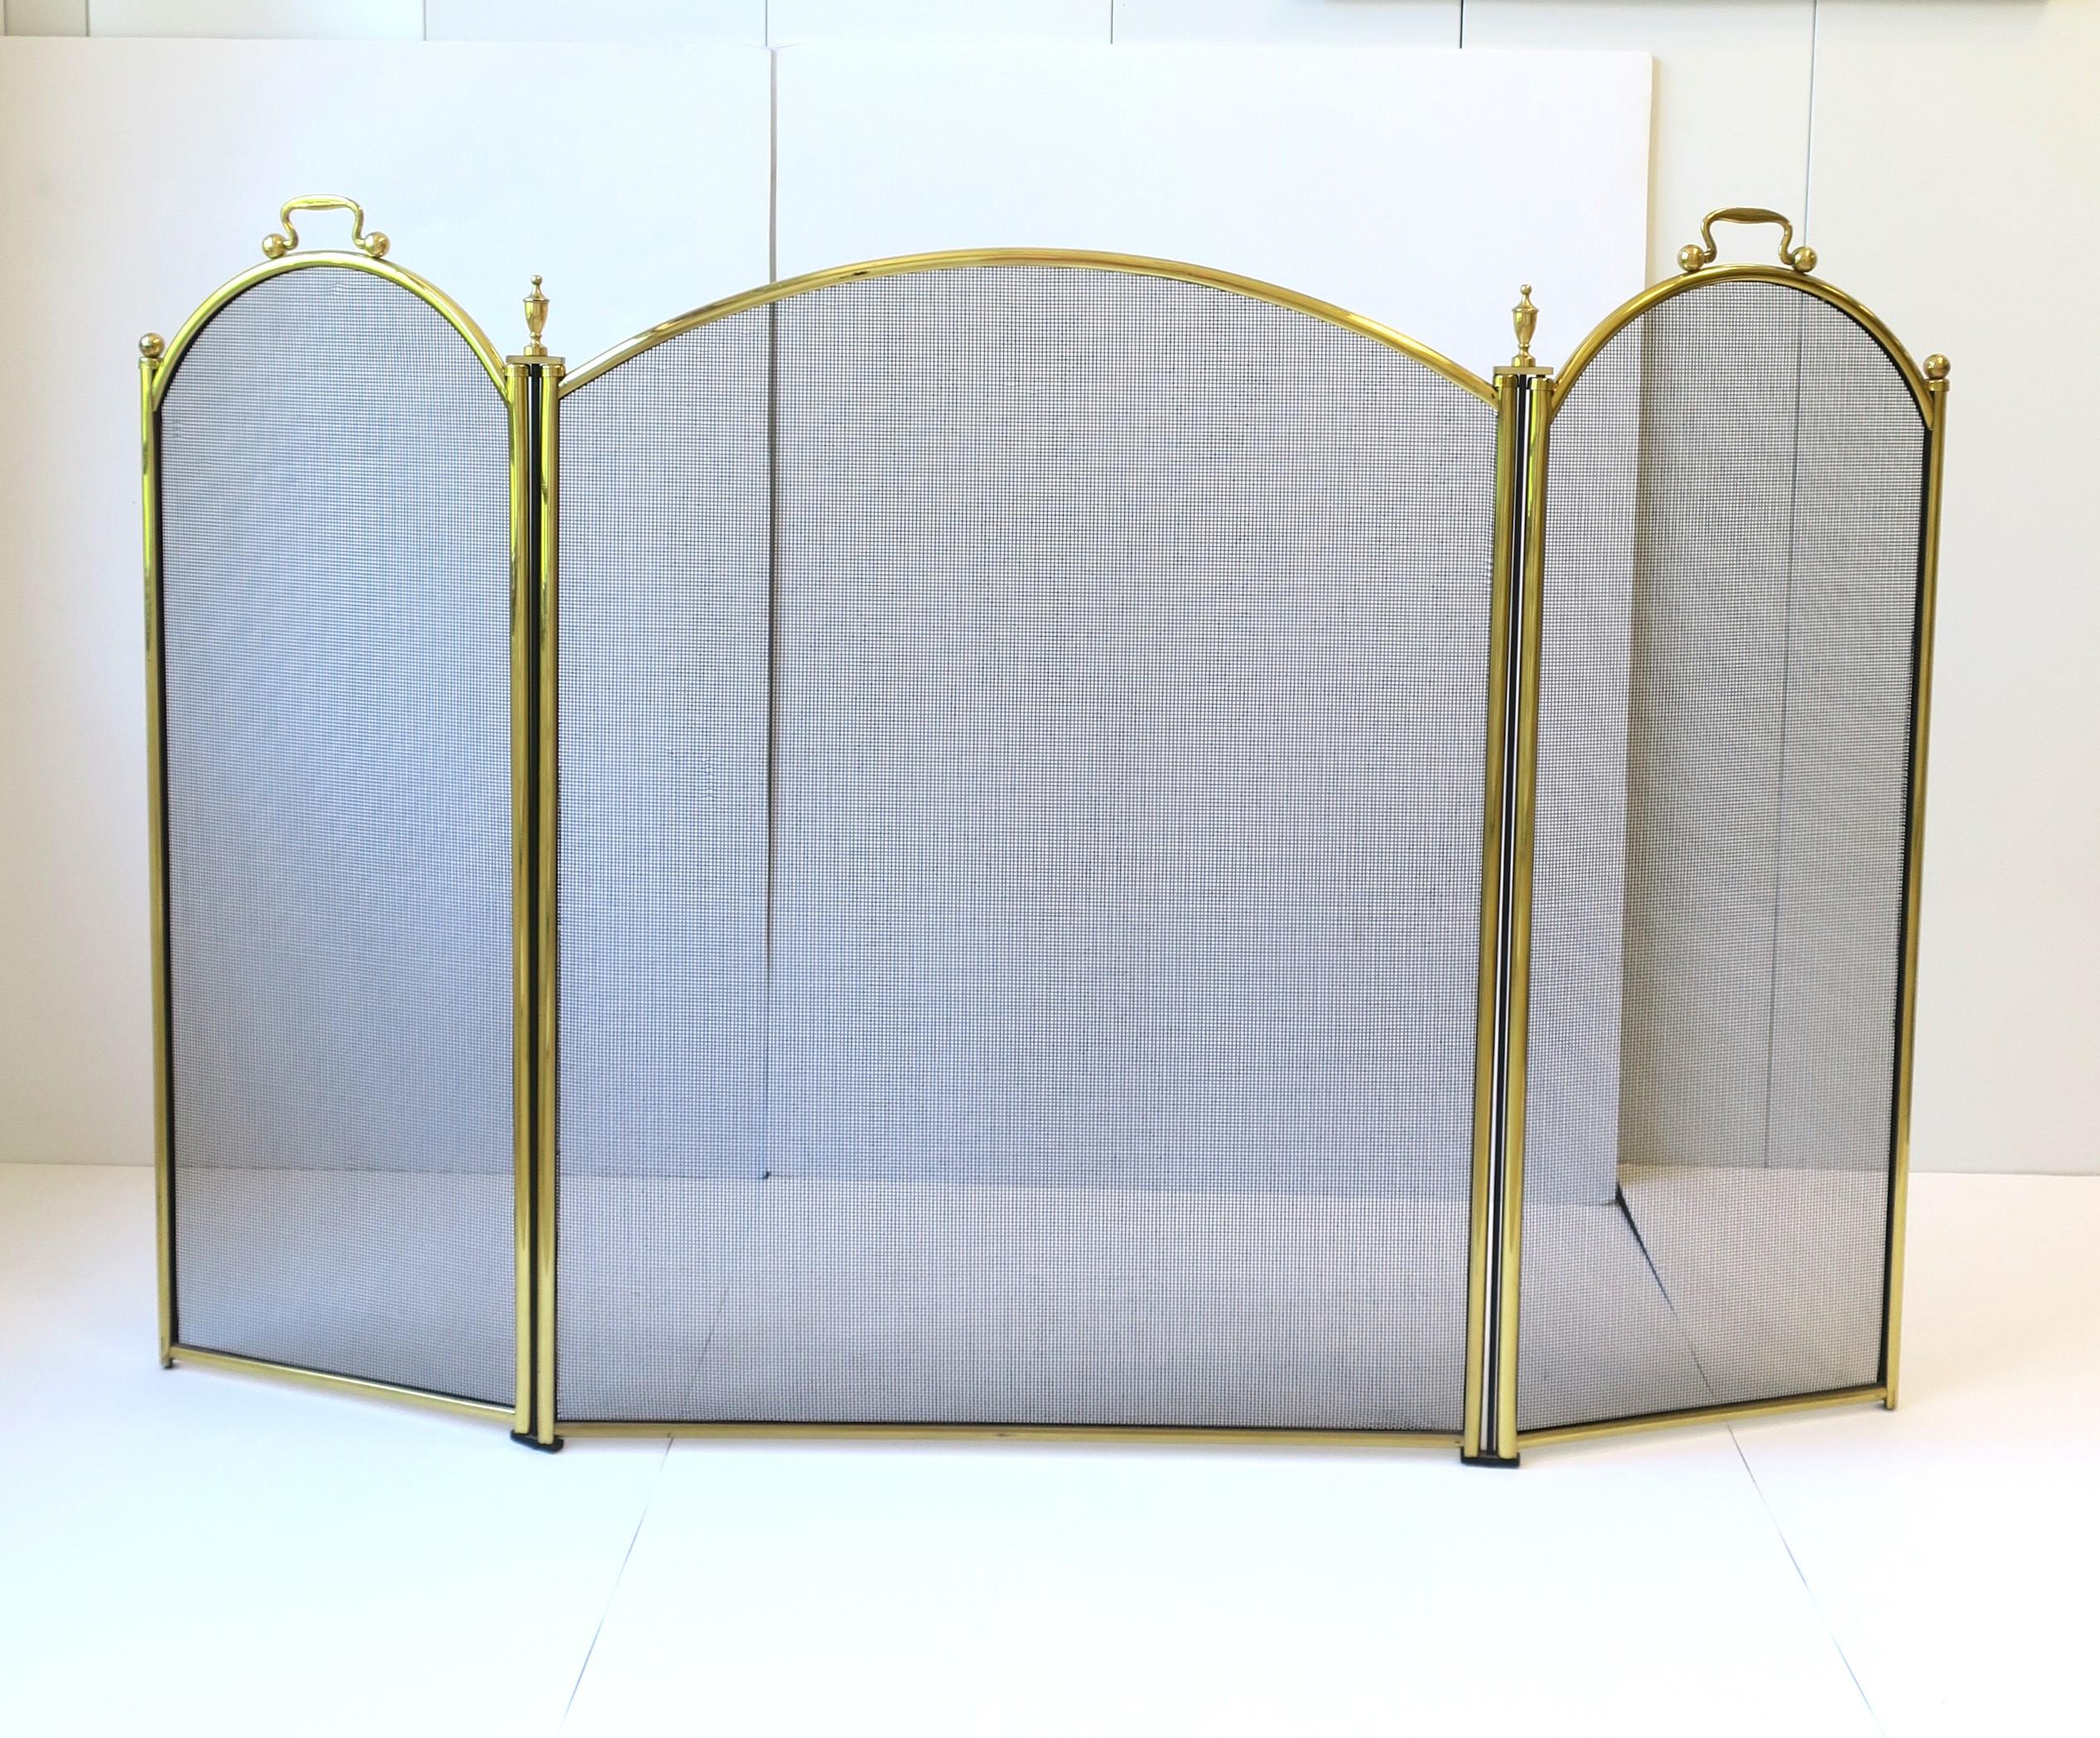 A brass frame fireplace screen with handles and finial details, circa late-20th century. Screen is a trifold with brass frame, black mesh metal screen, brass handles and finials. The trifold is nice because it allows no obstruction to front of